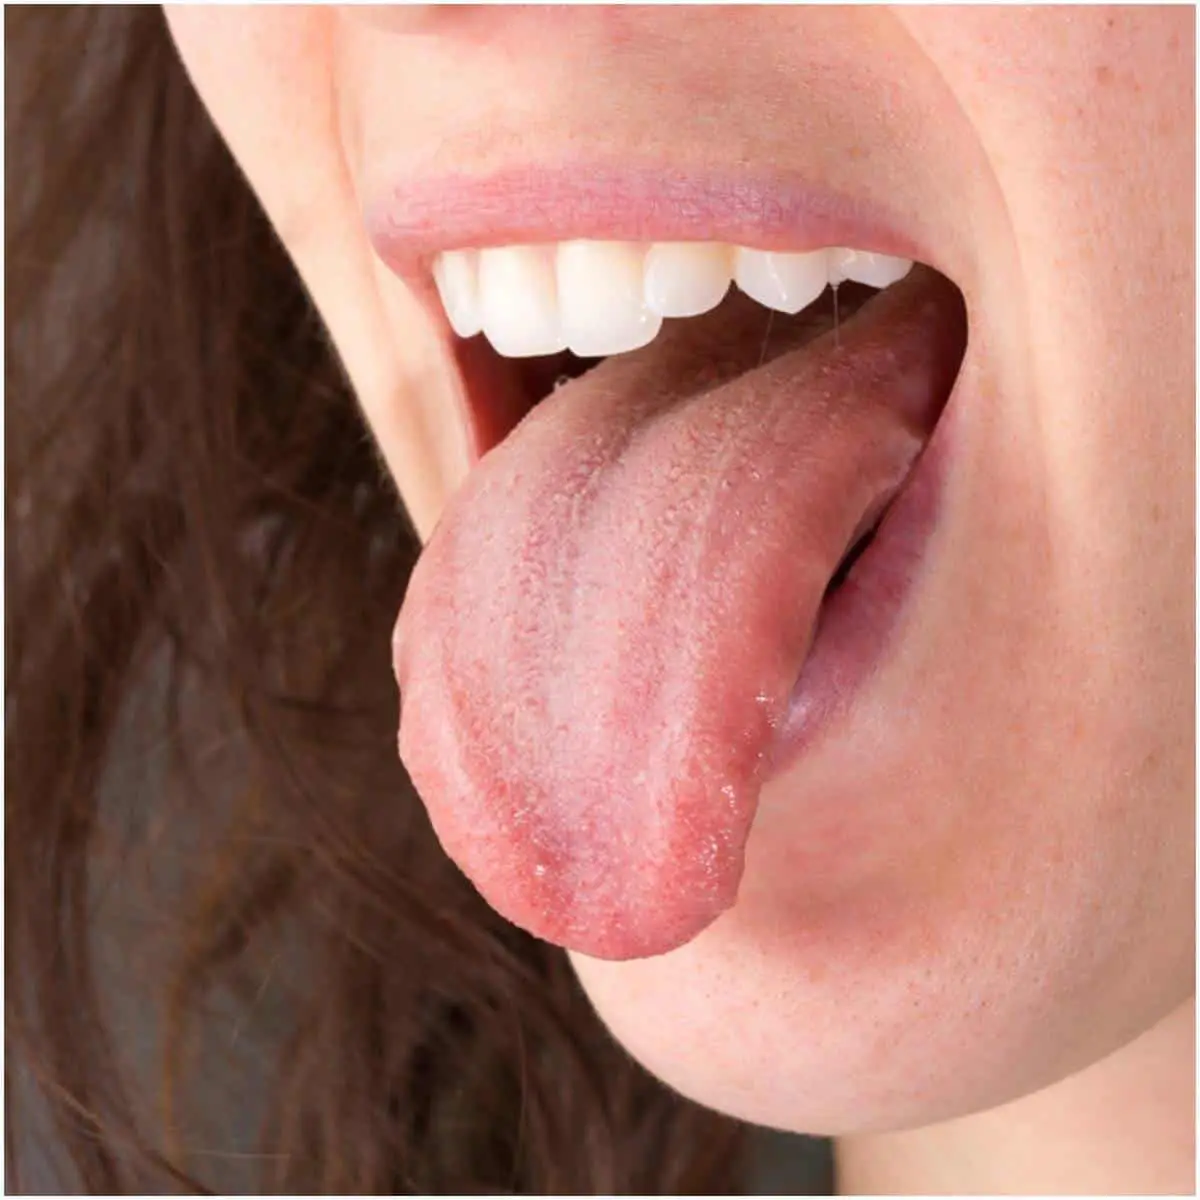 Symptoms of qi deficiency related to the tongue